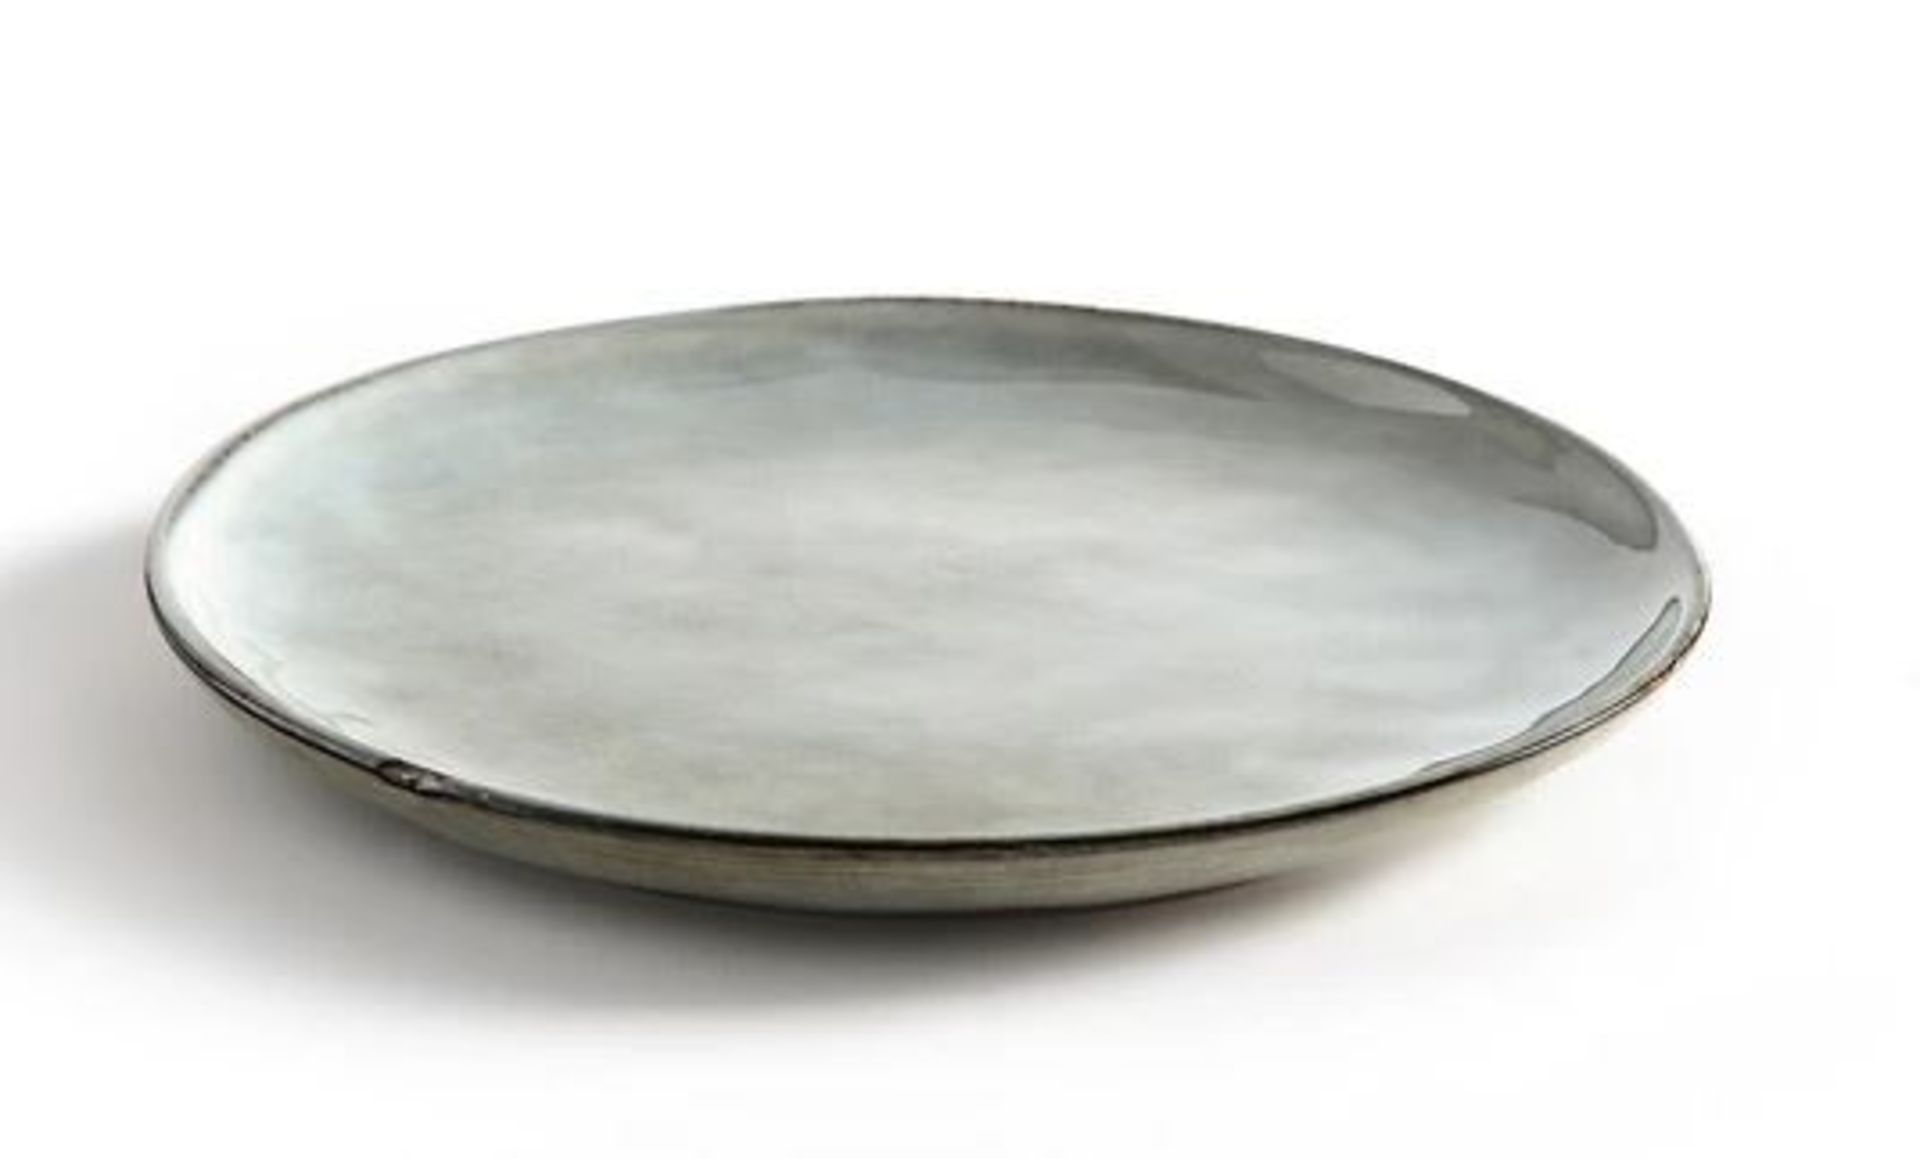 1 X SET OF 4 HORCIAG STONEWARE DESSERT PLATES IN GREY-GREEN / RRP £40.00 / GRADE A